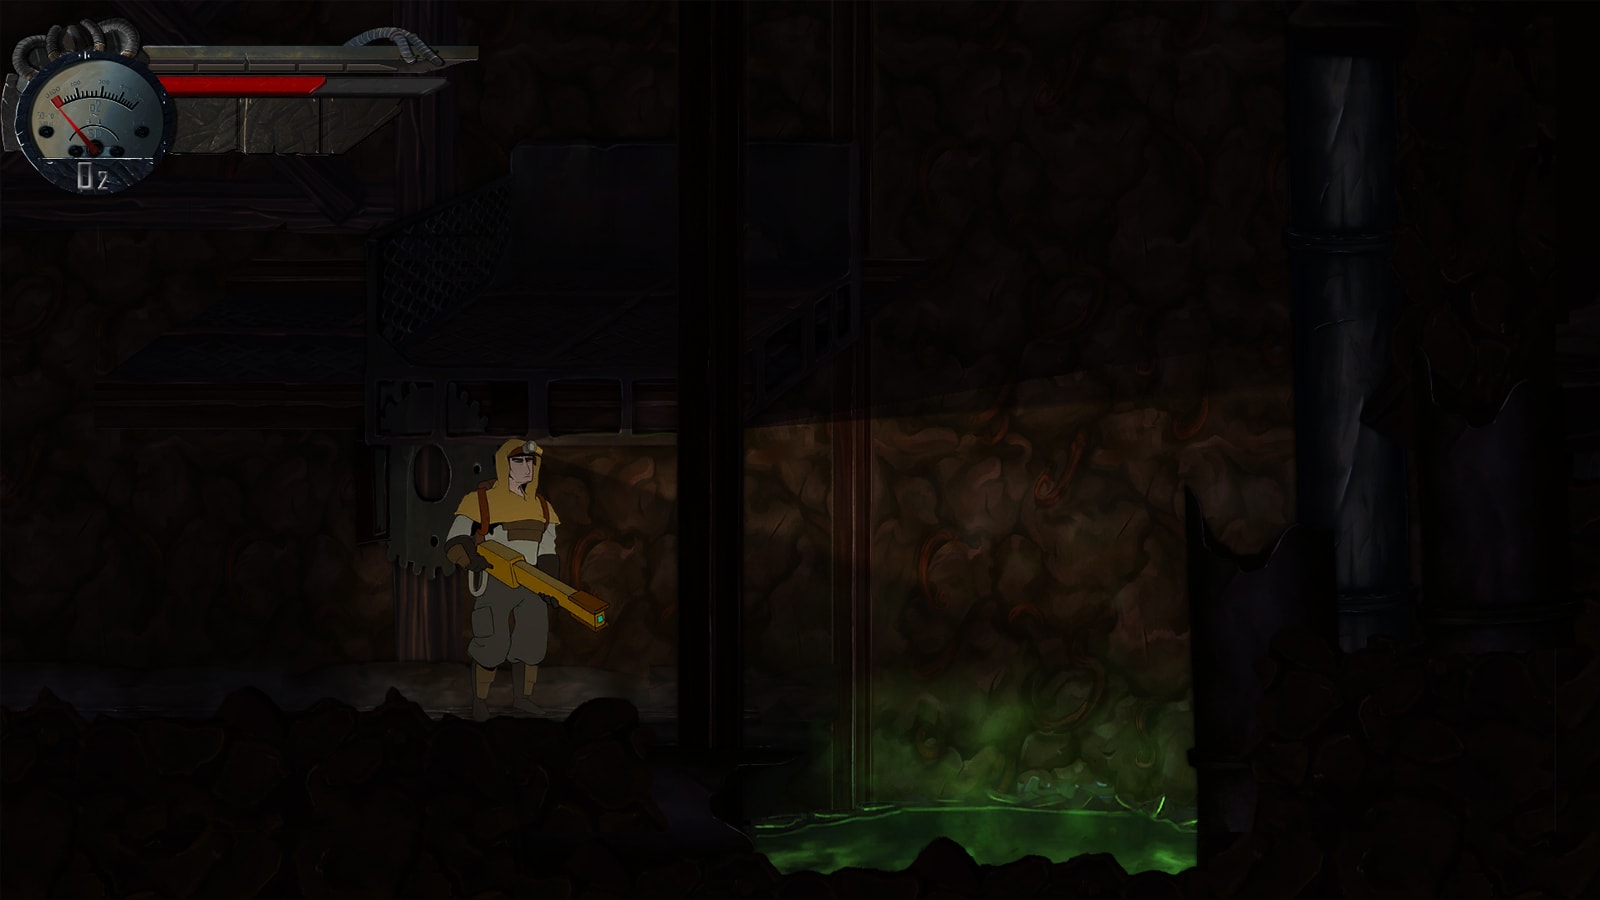 The game&#039;s hero looks at a pit full of green, toxic sludge